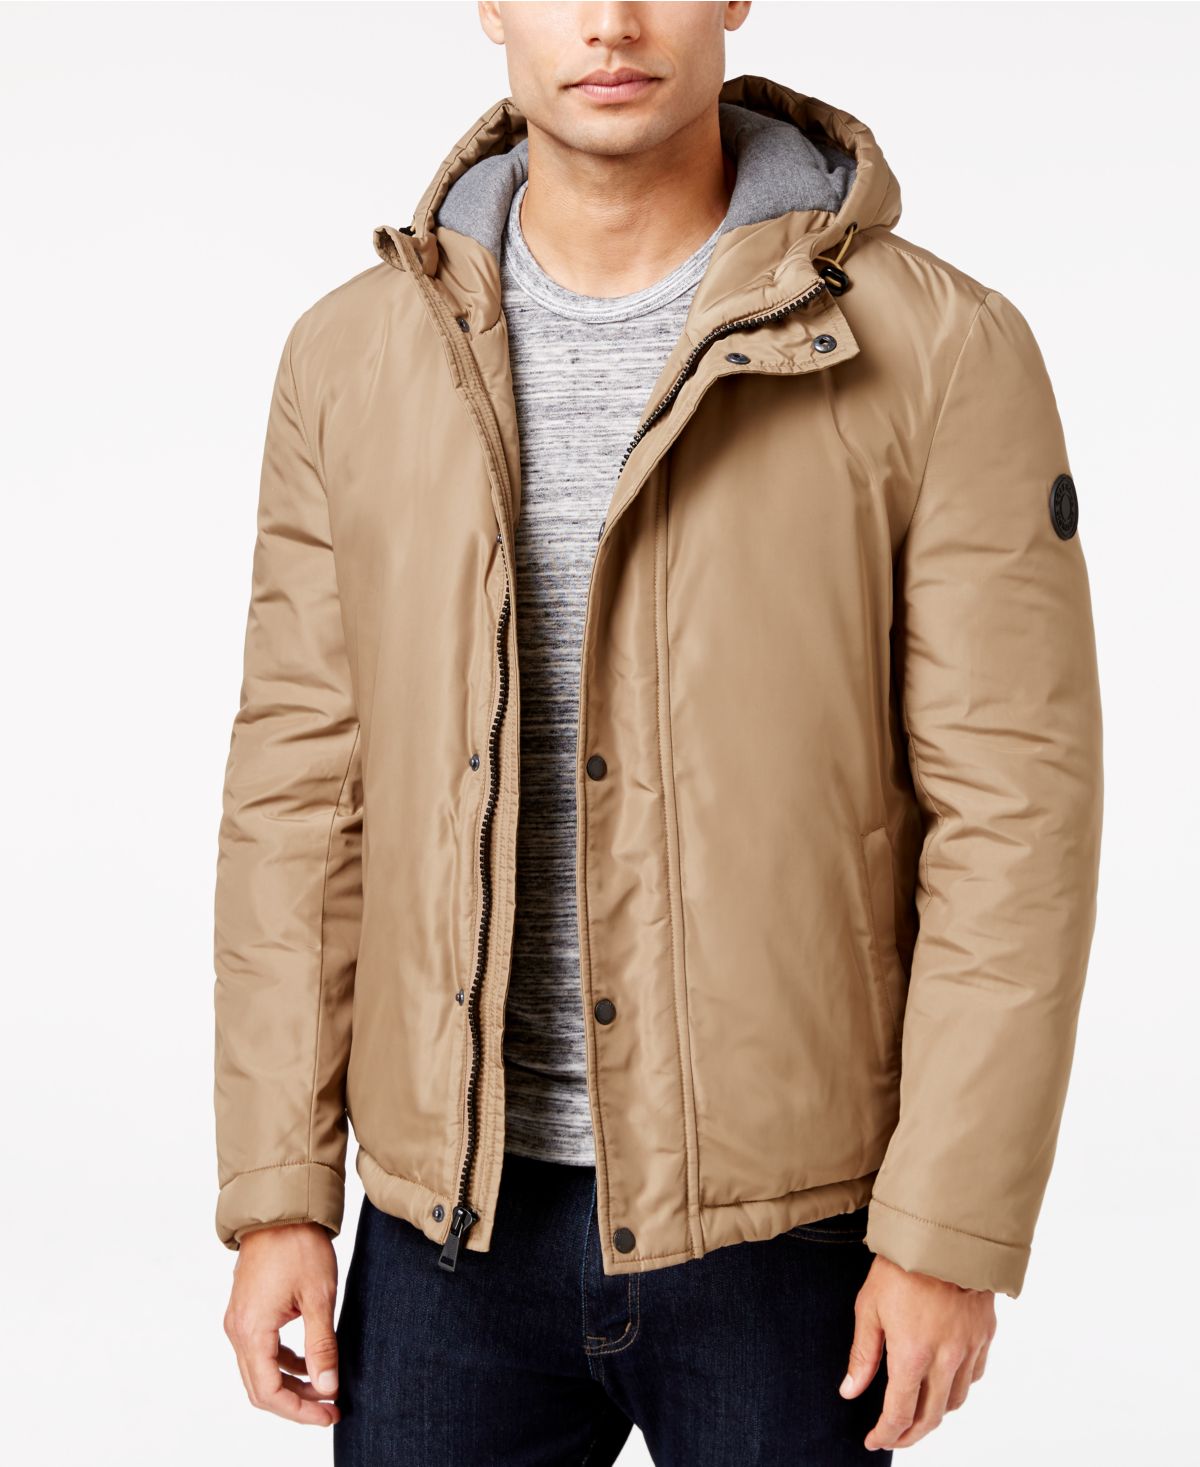 MACYS LAST ACT! MEN&#39;S COATS AND MORE UP TO 80% OFF PRICES AS LOW AS $20.99! dealsaving